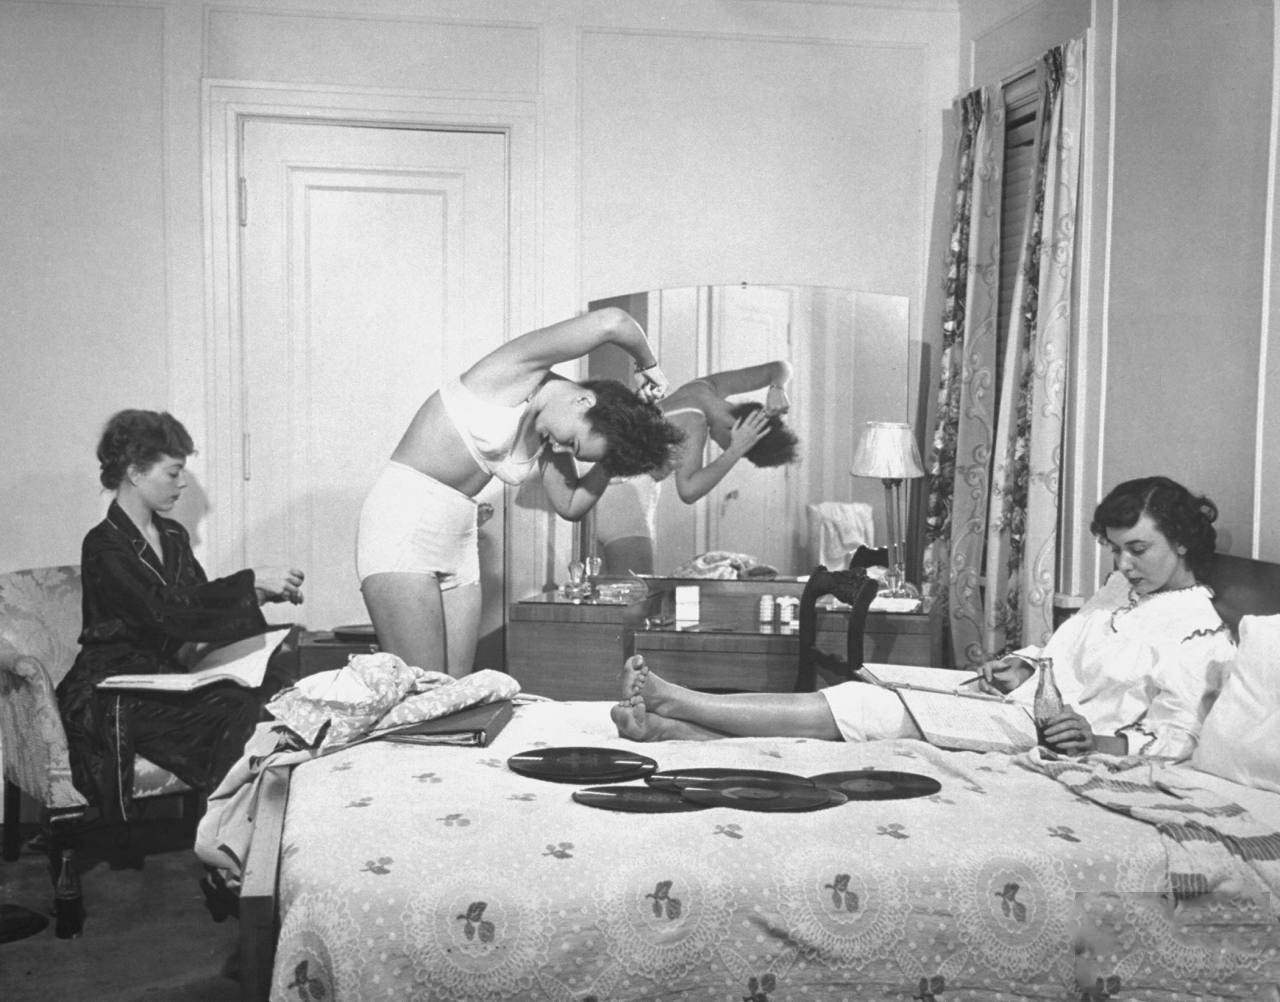 Students at the McConnell Air Hostess School relaxing in their room.